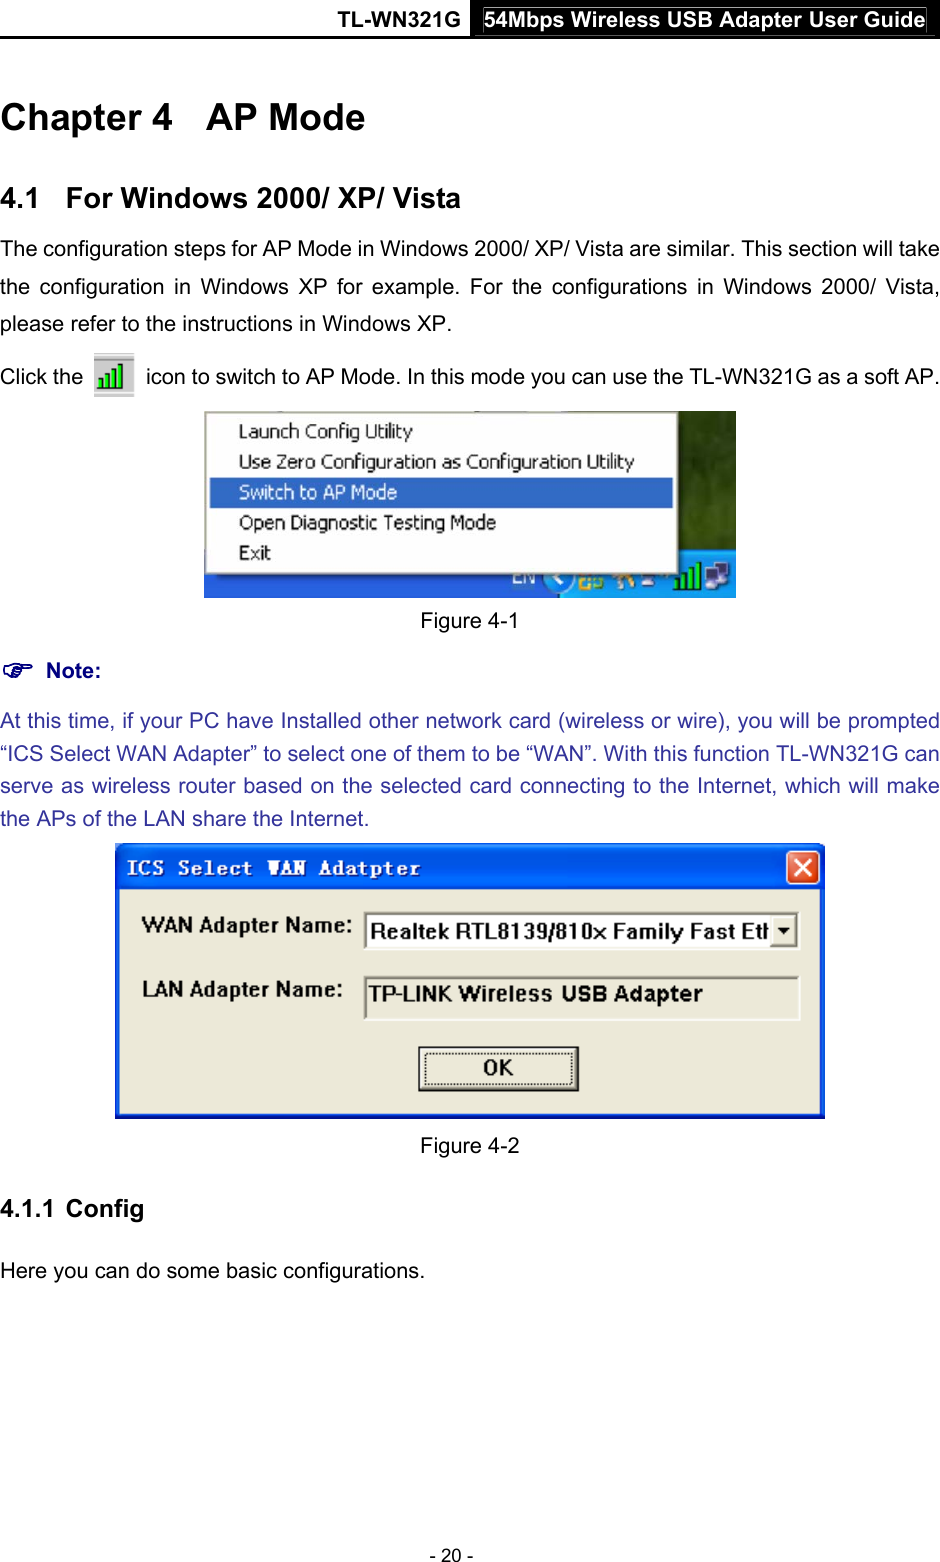 54Mbps Wireless USB Adapter User GuideTL-WN321G - 20 - Chapter 4  AP Mode 4.1  For Windows 2000/ XP/ Vista The configuration steps for AP Mode in Windows 2000/ XP/ Vista are similar. This section will take the configuration in Windows XP for example. For the configurations in Windows 2000/ Vista, please refer to the instructions in Windows XP. Click the    icon to switch to AP Mode. In this mode you can use the TL-WN321G as a soft AP.  Figure 4-1 ) Note:  At this time, if your PC have Installed other network card (wireless or wire), you will be prompted “ICS Select WAN Adapter” to select one of them to be “WAN”. With this function TL-WN321G can serve as wireless router based on the selected card connecting to the Internet, which will make the APs of the LAN share the Internet.  Figure 4-2 4.1.1  Config Here you can do some basic configurations.   